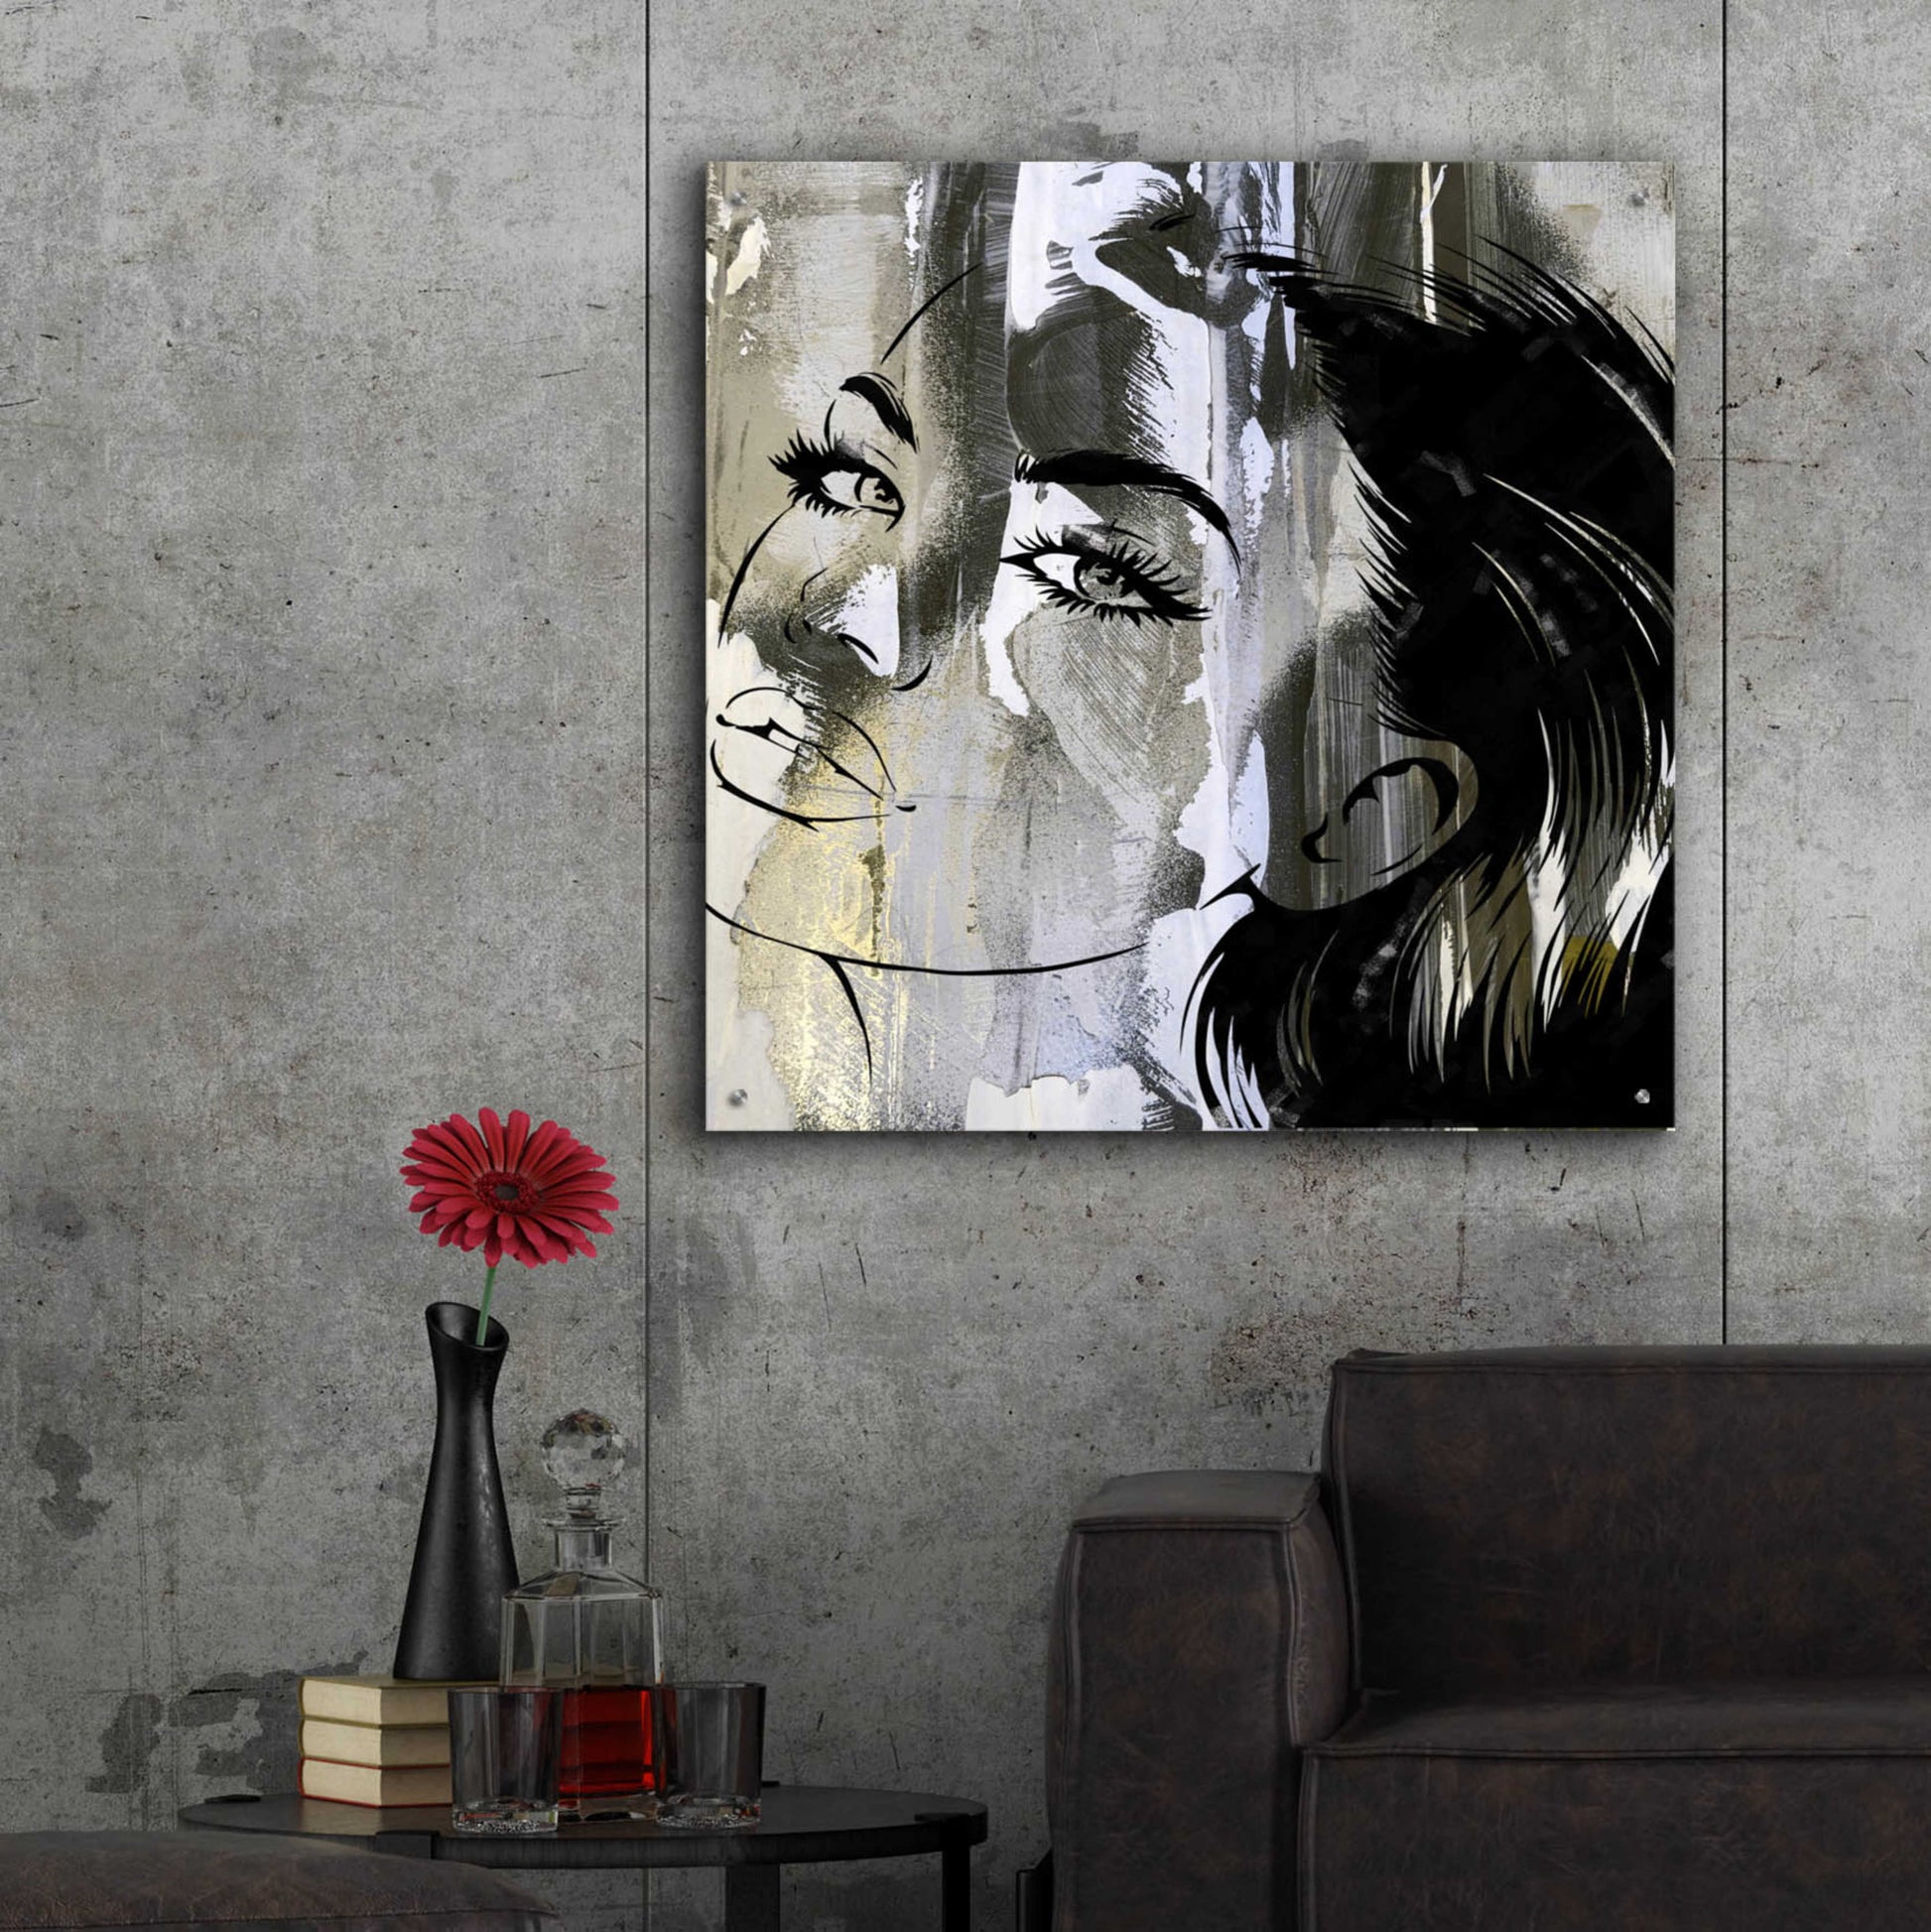 Epic Art 'Face In The Wall 2' by Karen Smith Acrylic Glass Wall Art,36x36